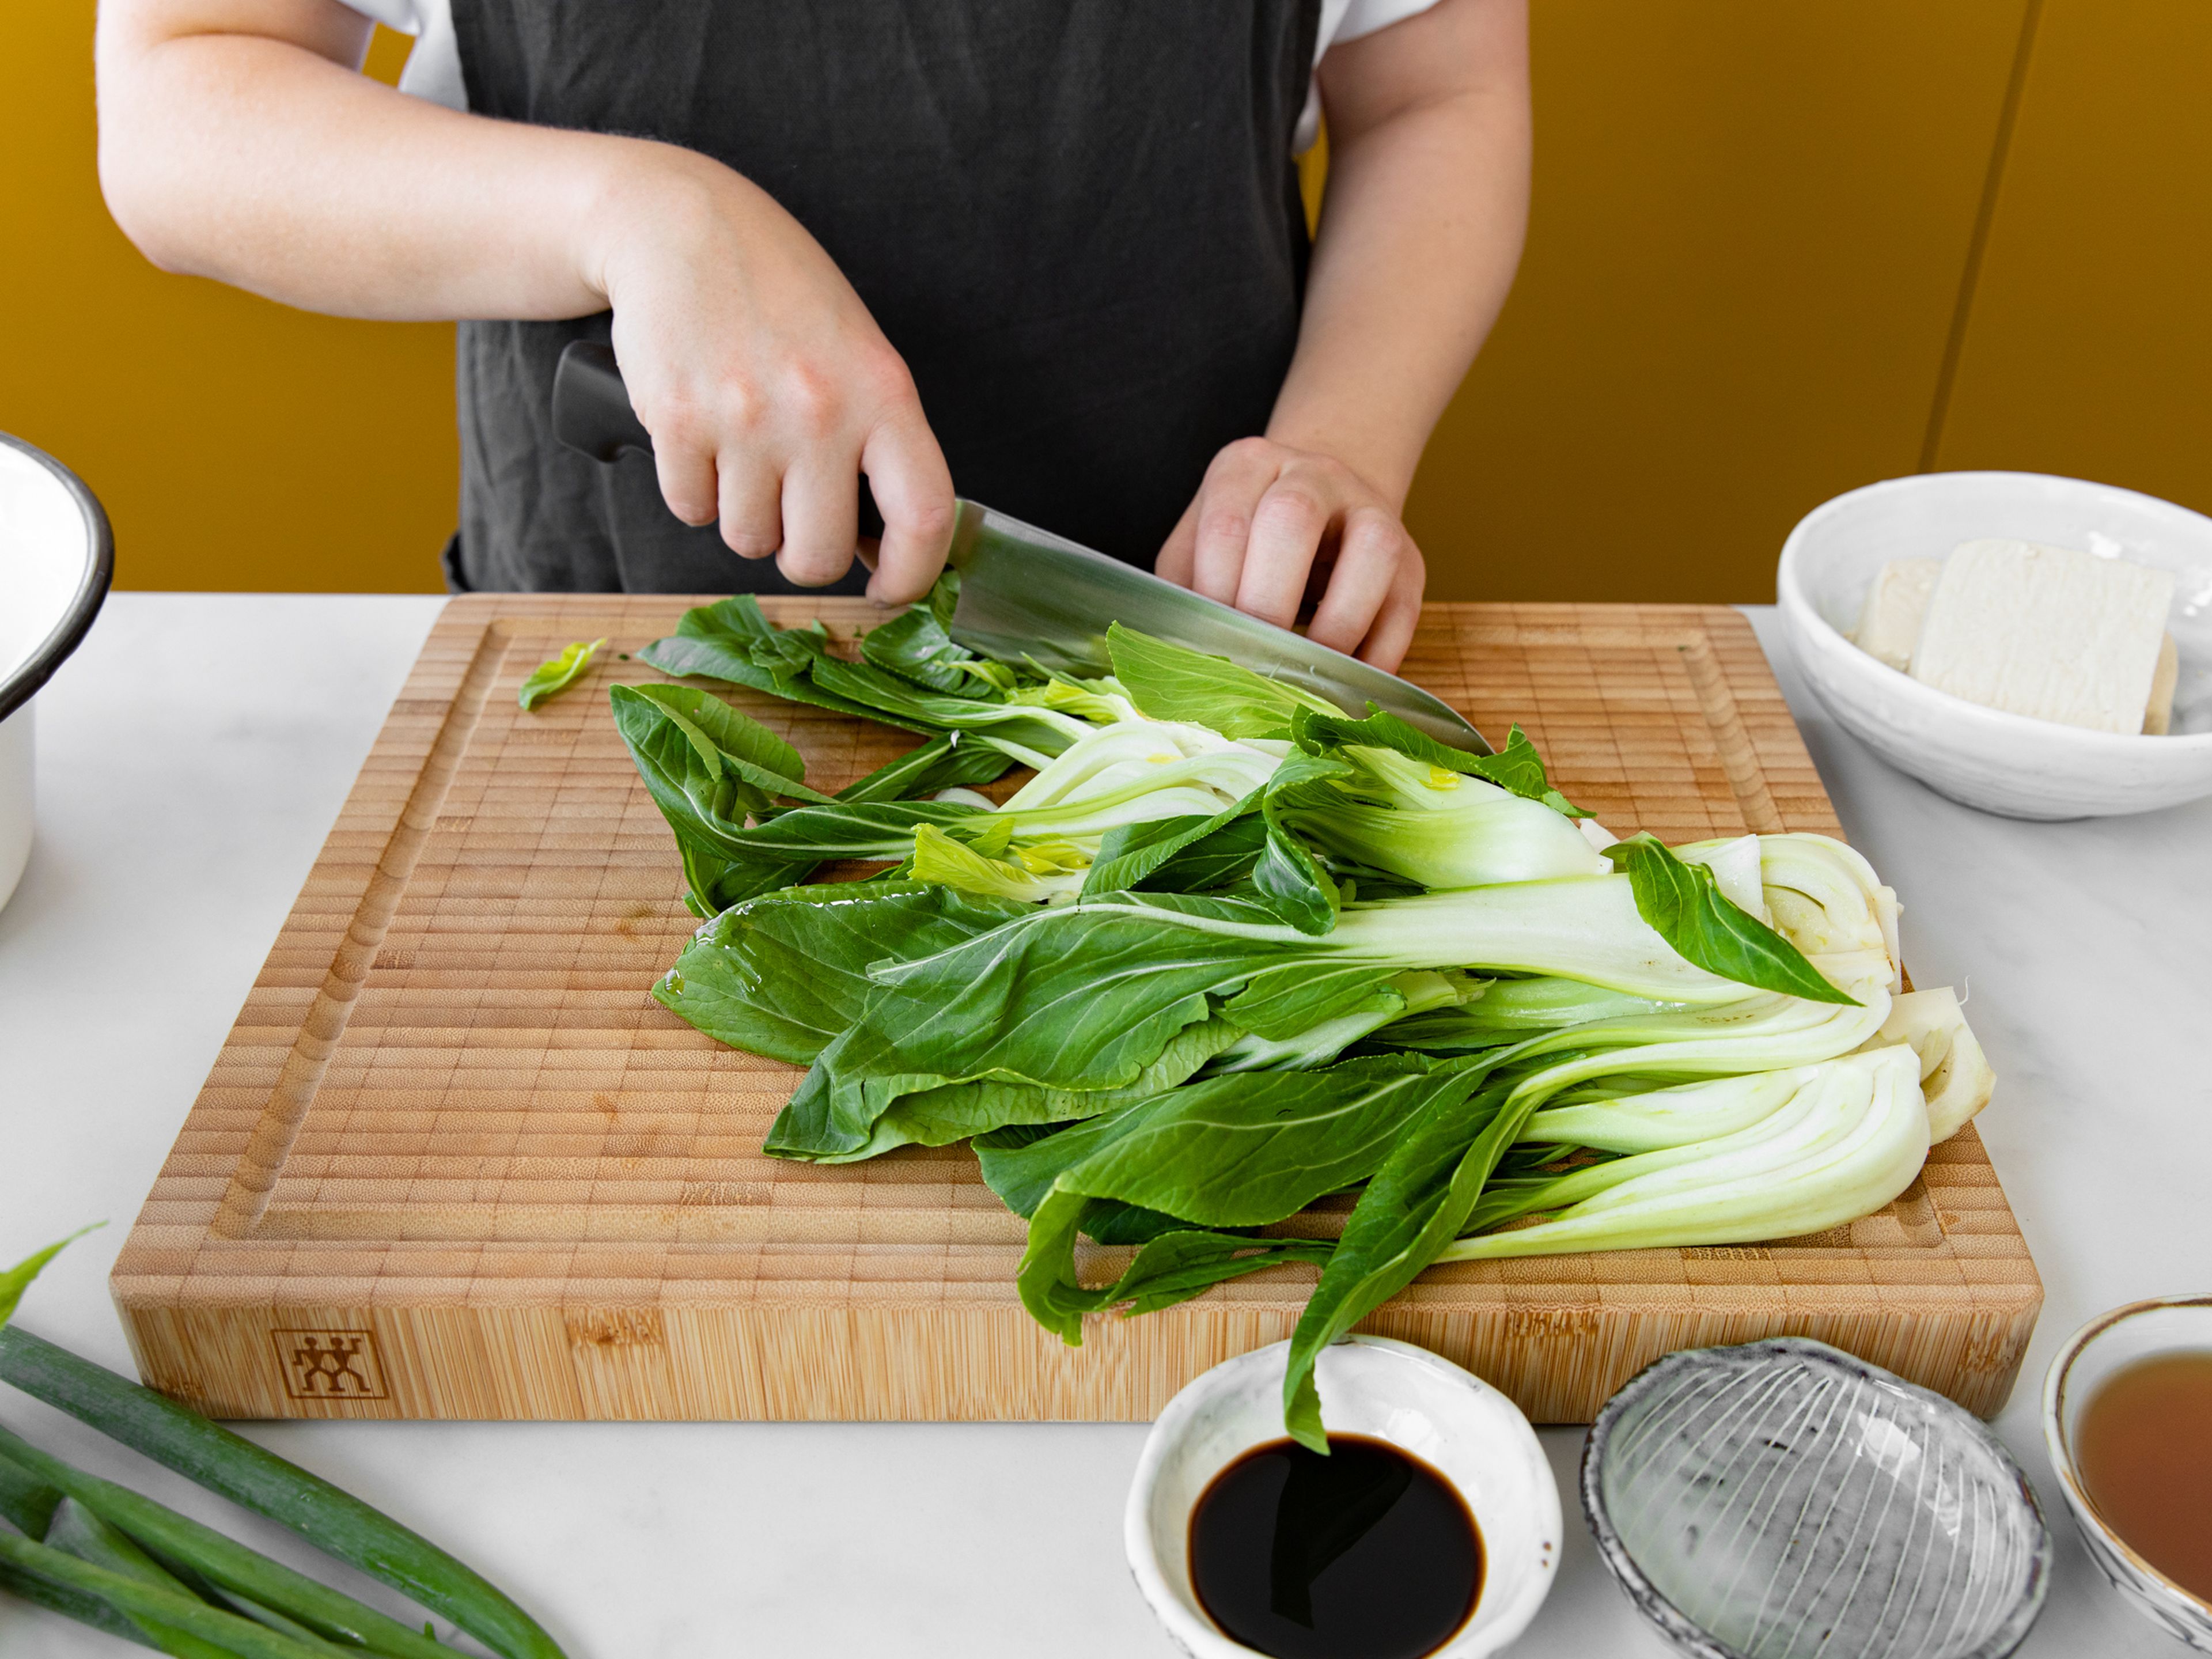 Peel and finely dice scallion and garlic. Deseed chili and slice into thin rings. Trim the ends off bok choy heads and slice each lengthwise into strips.